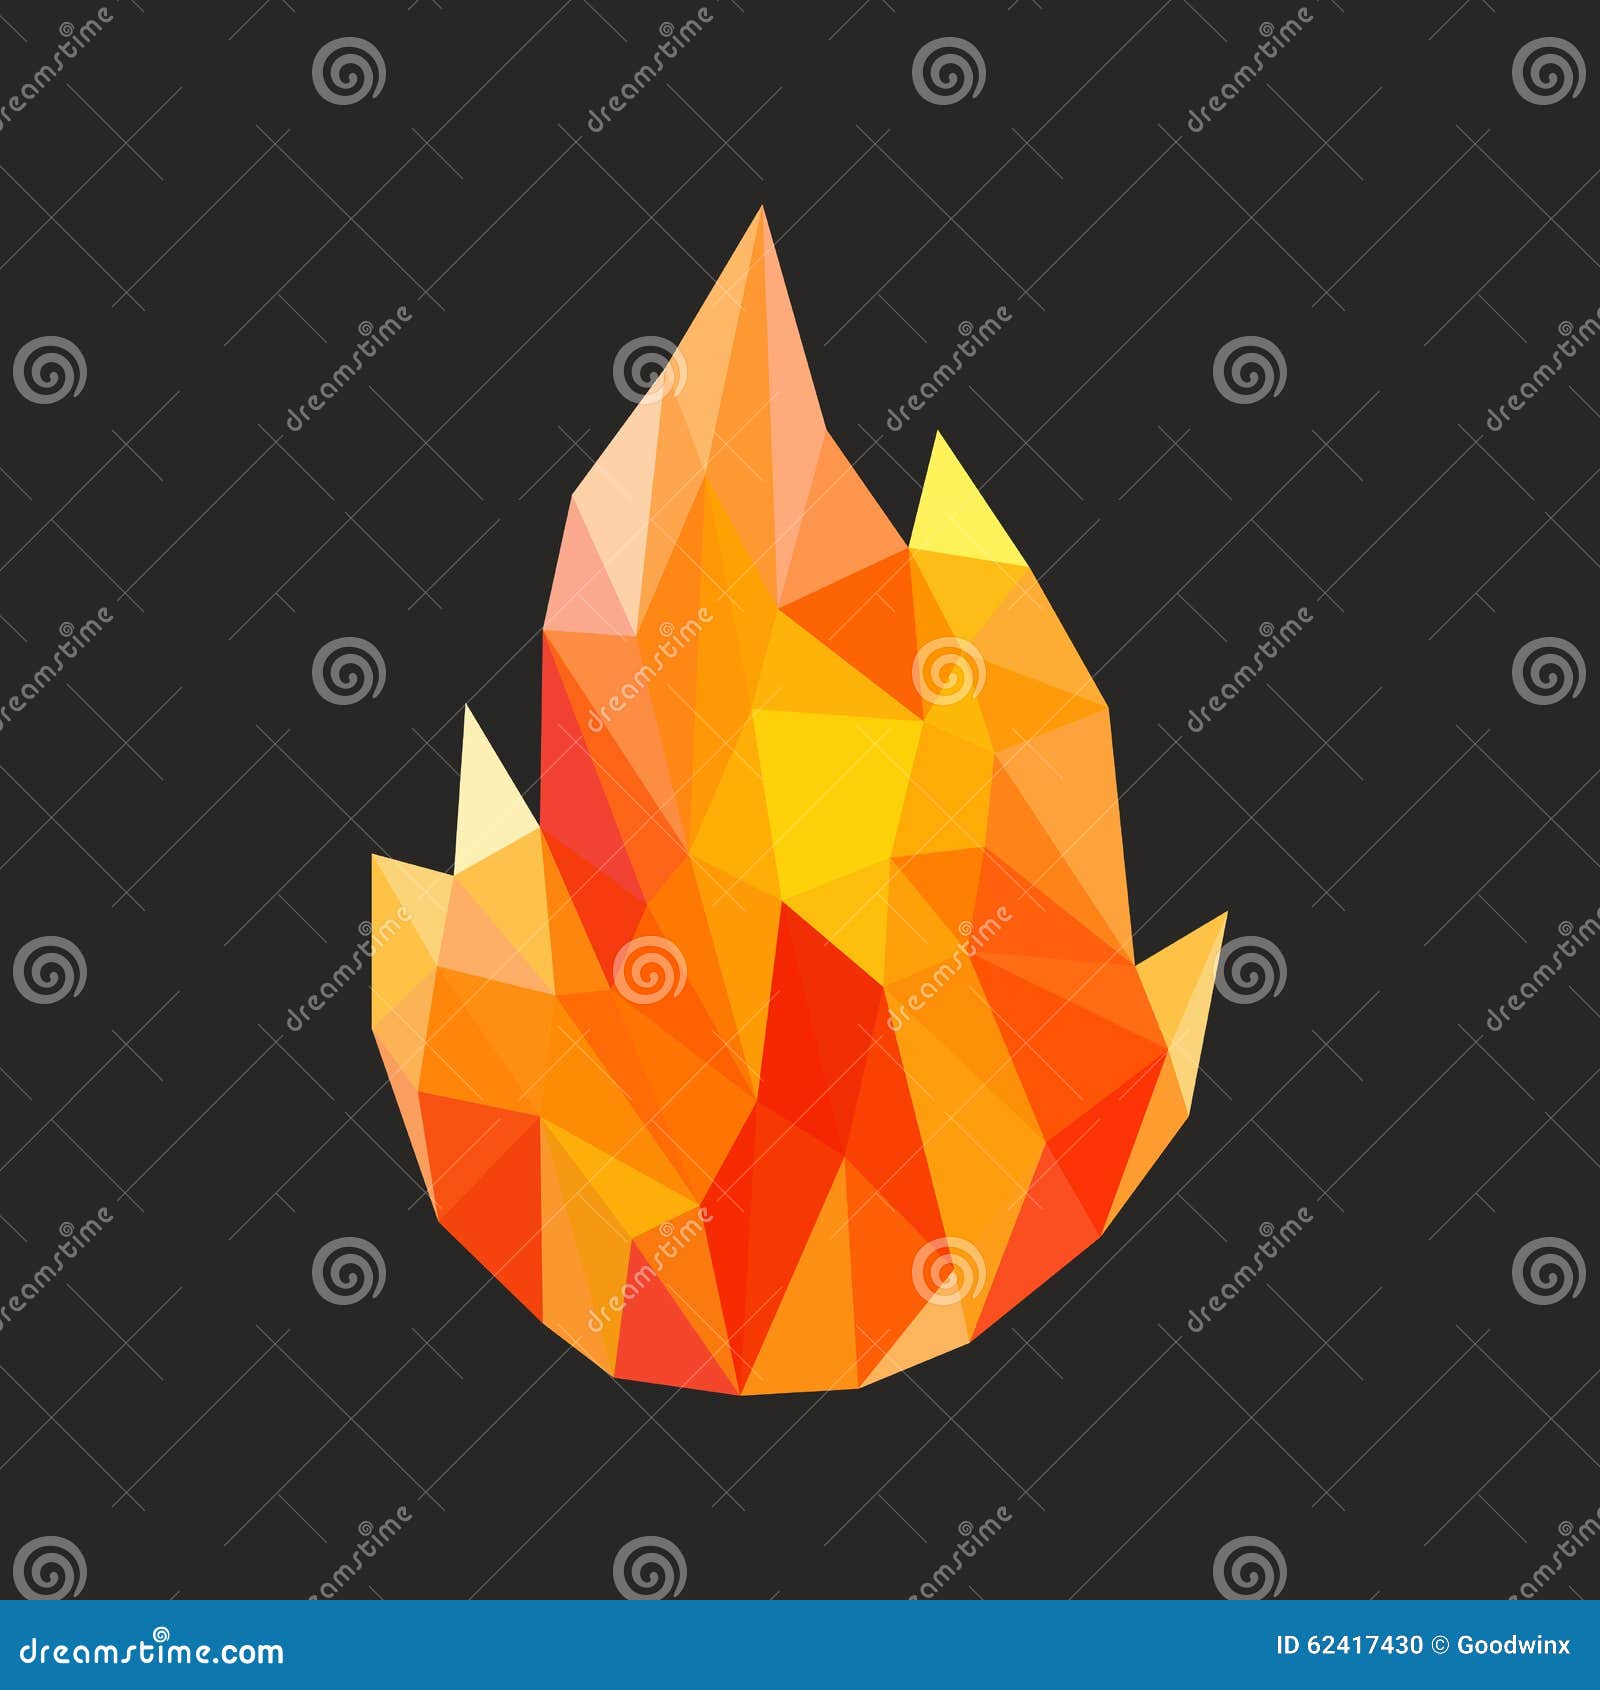 polygon fire flame flames natural and abstract